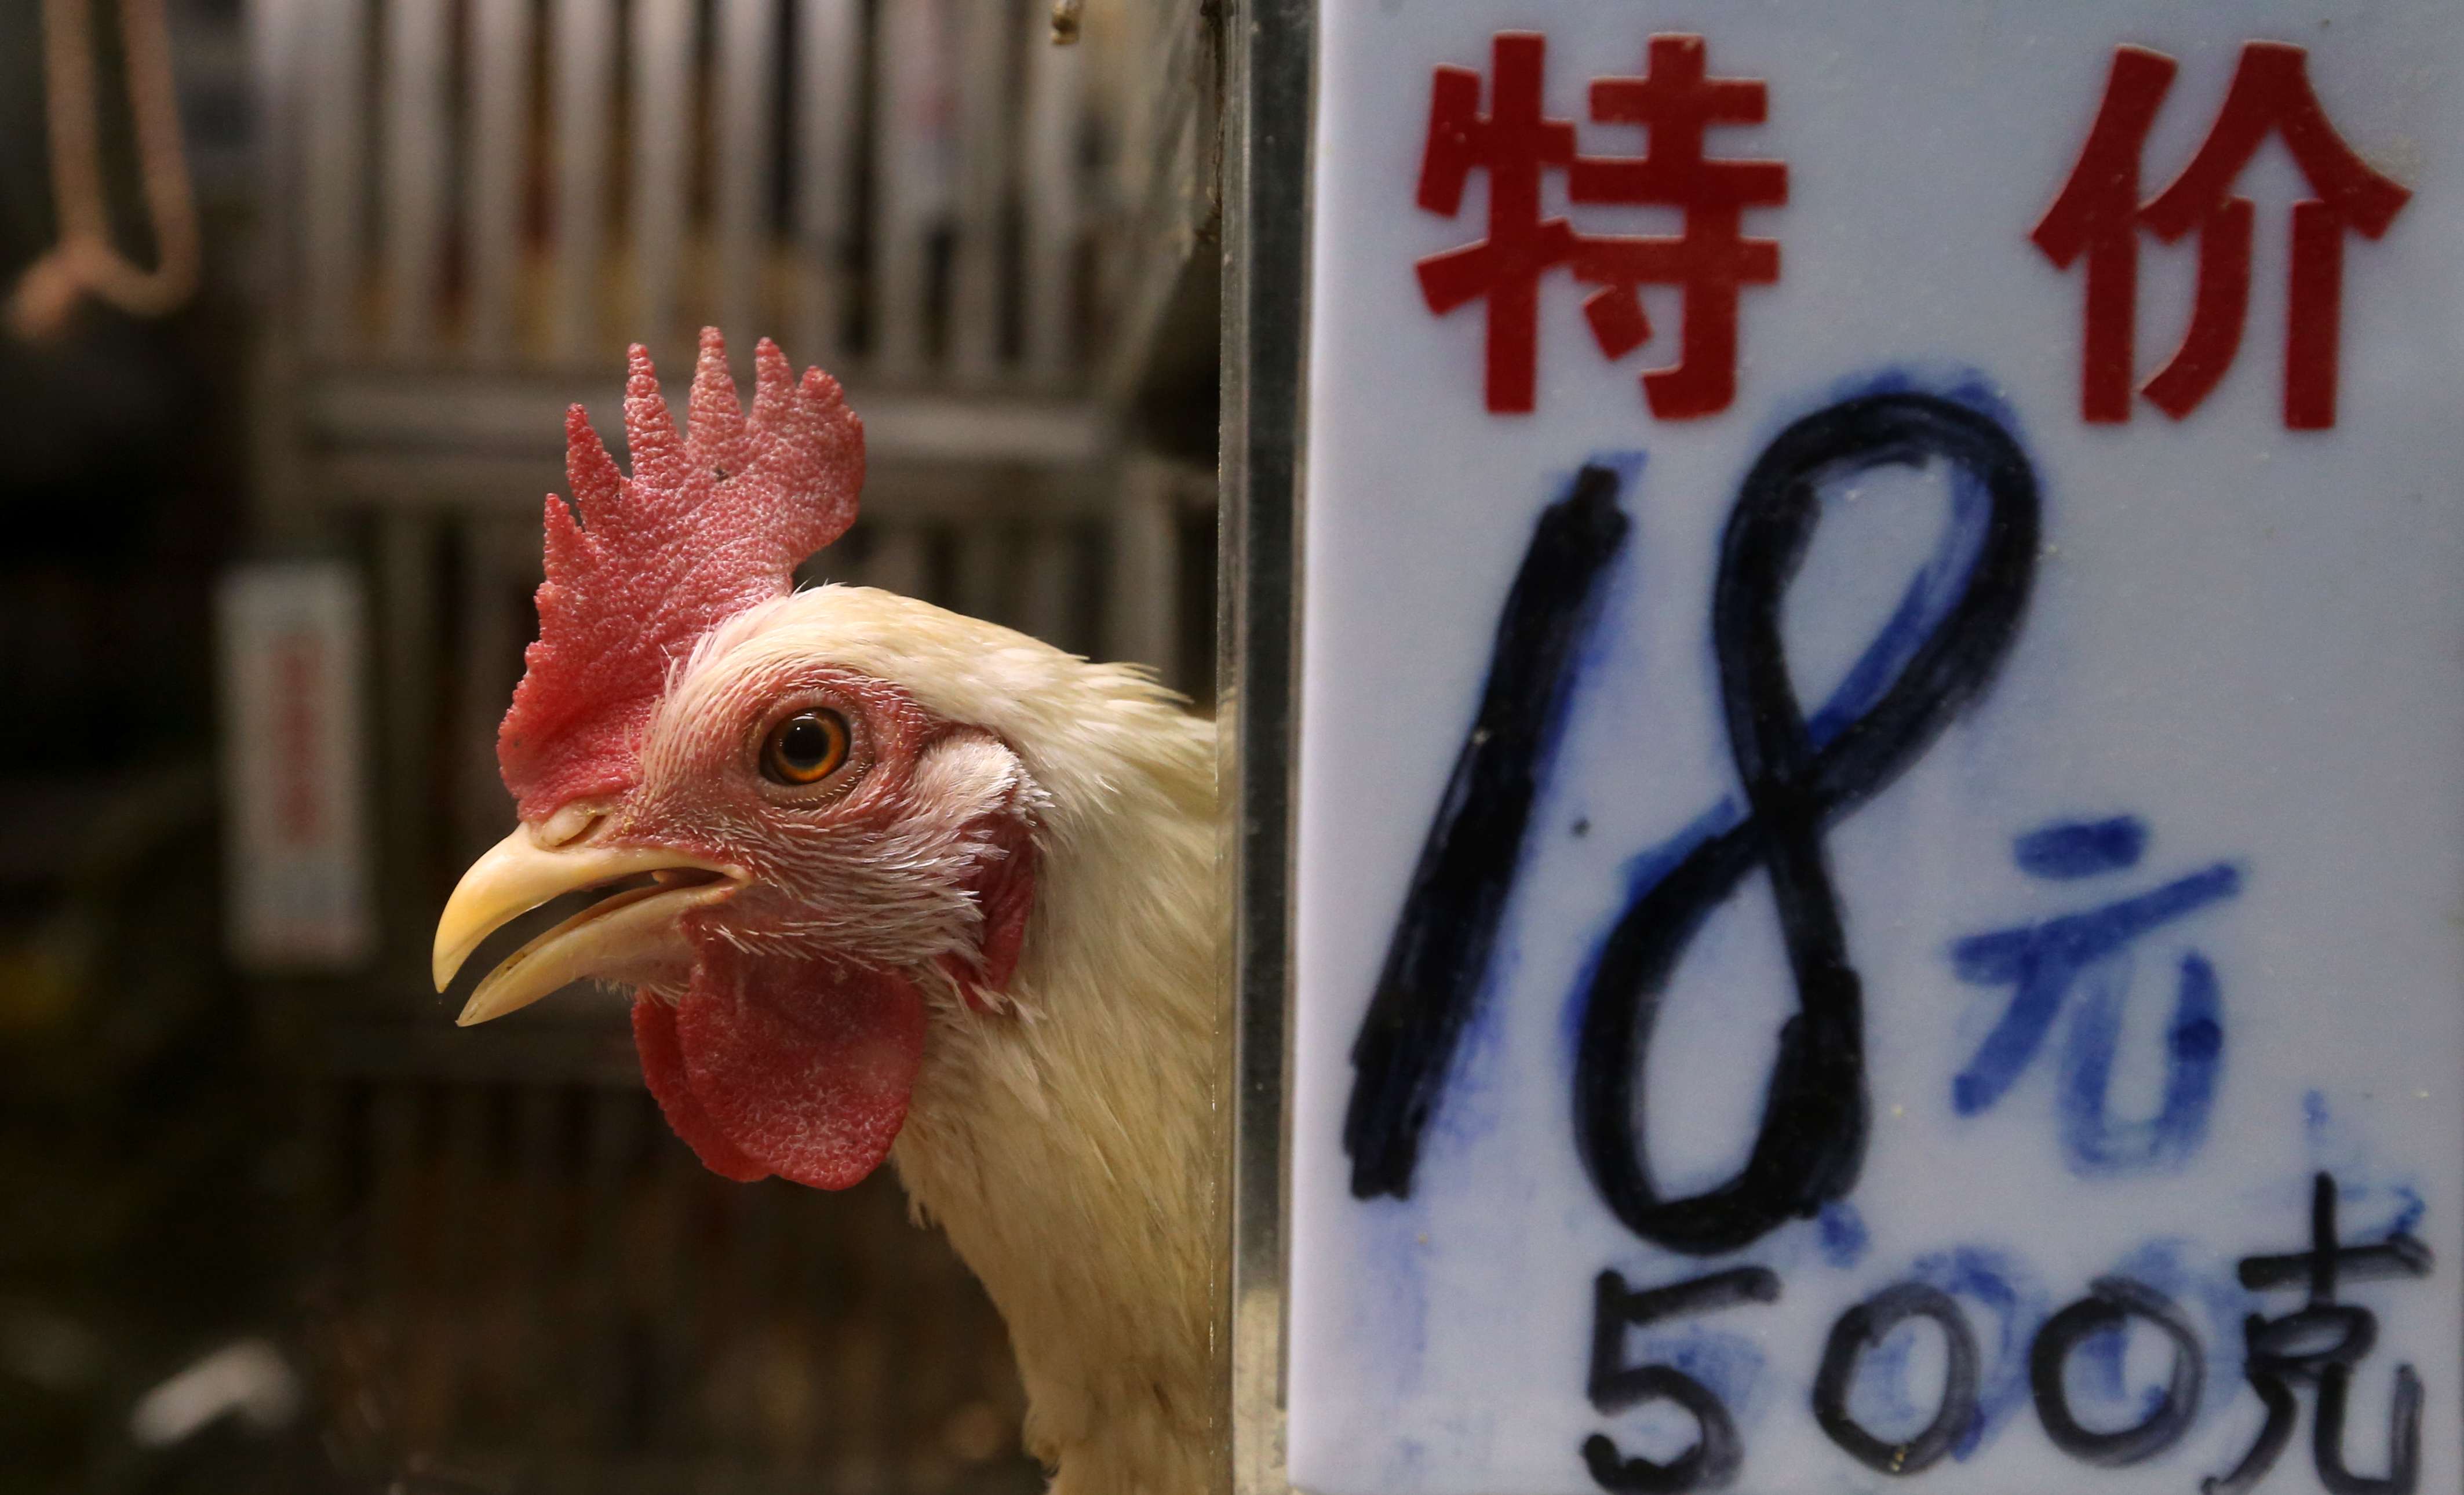 Guangzhou officials report that more than 30 per cent of live poultry markets are infected with bird flu. Photo: SCMP Pictures